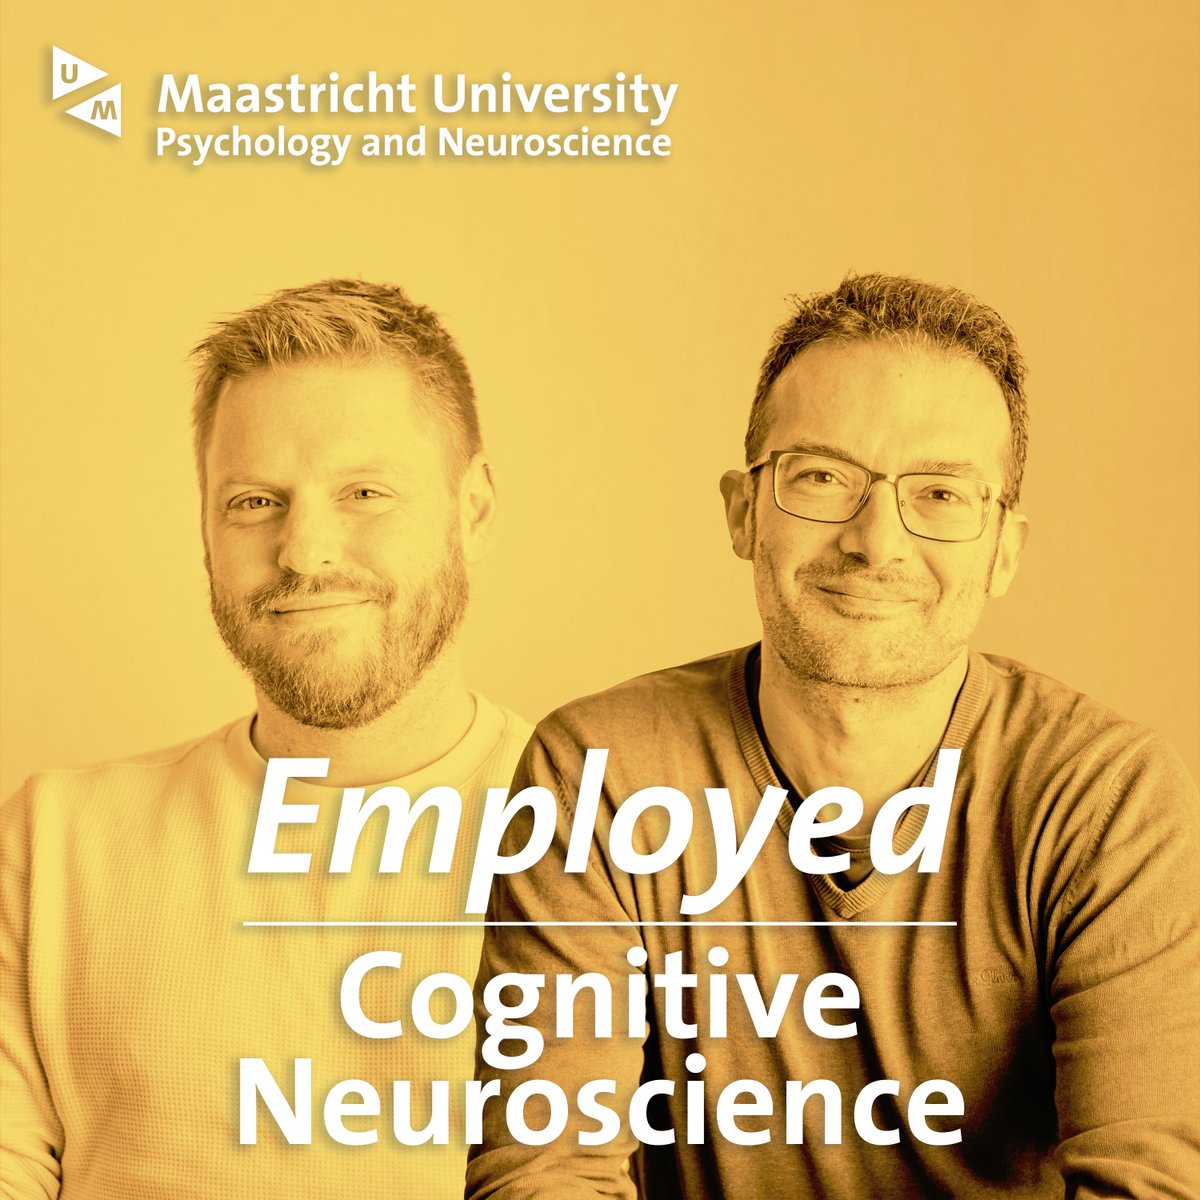 NEW PODCAST EPISODE! Today on Employed: Cognitive Neuroscience. tr.ee/lvyll0u2cA